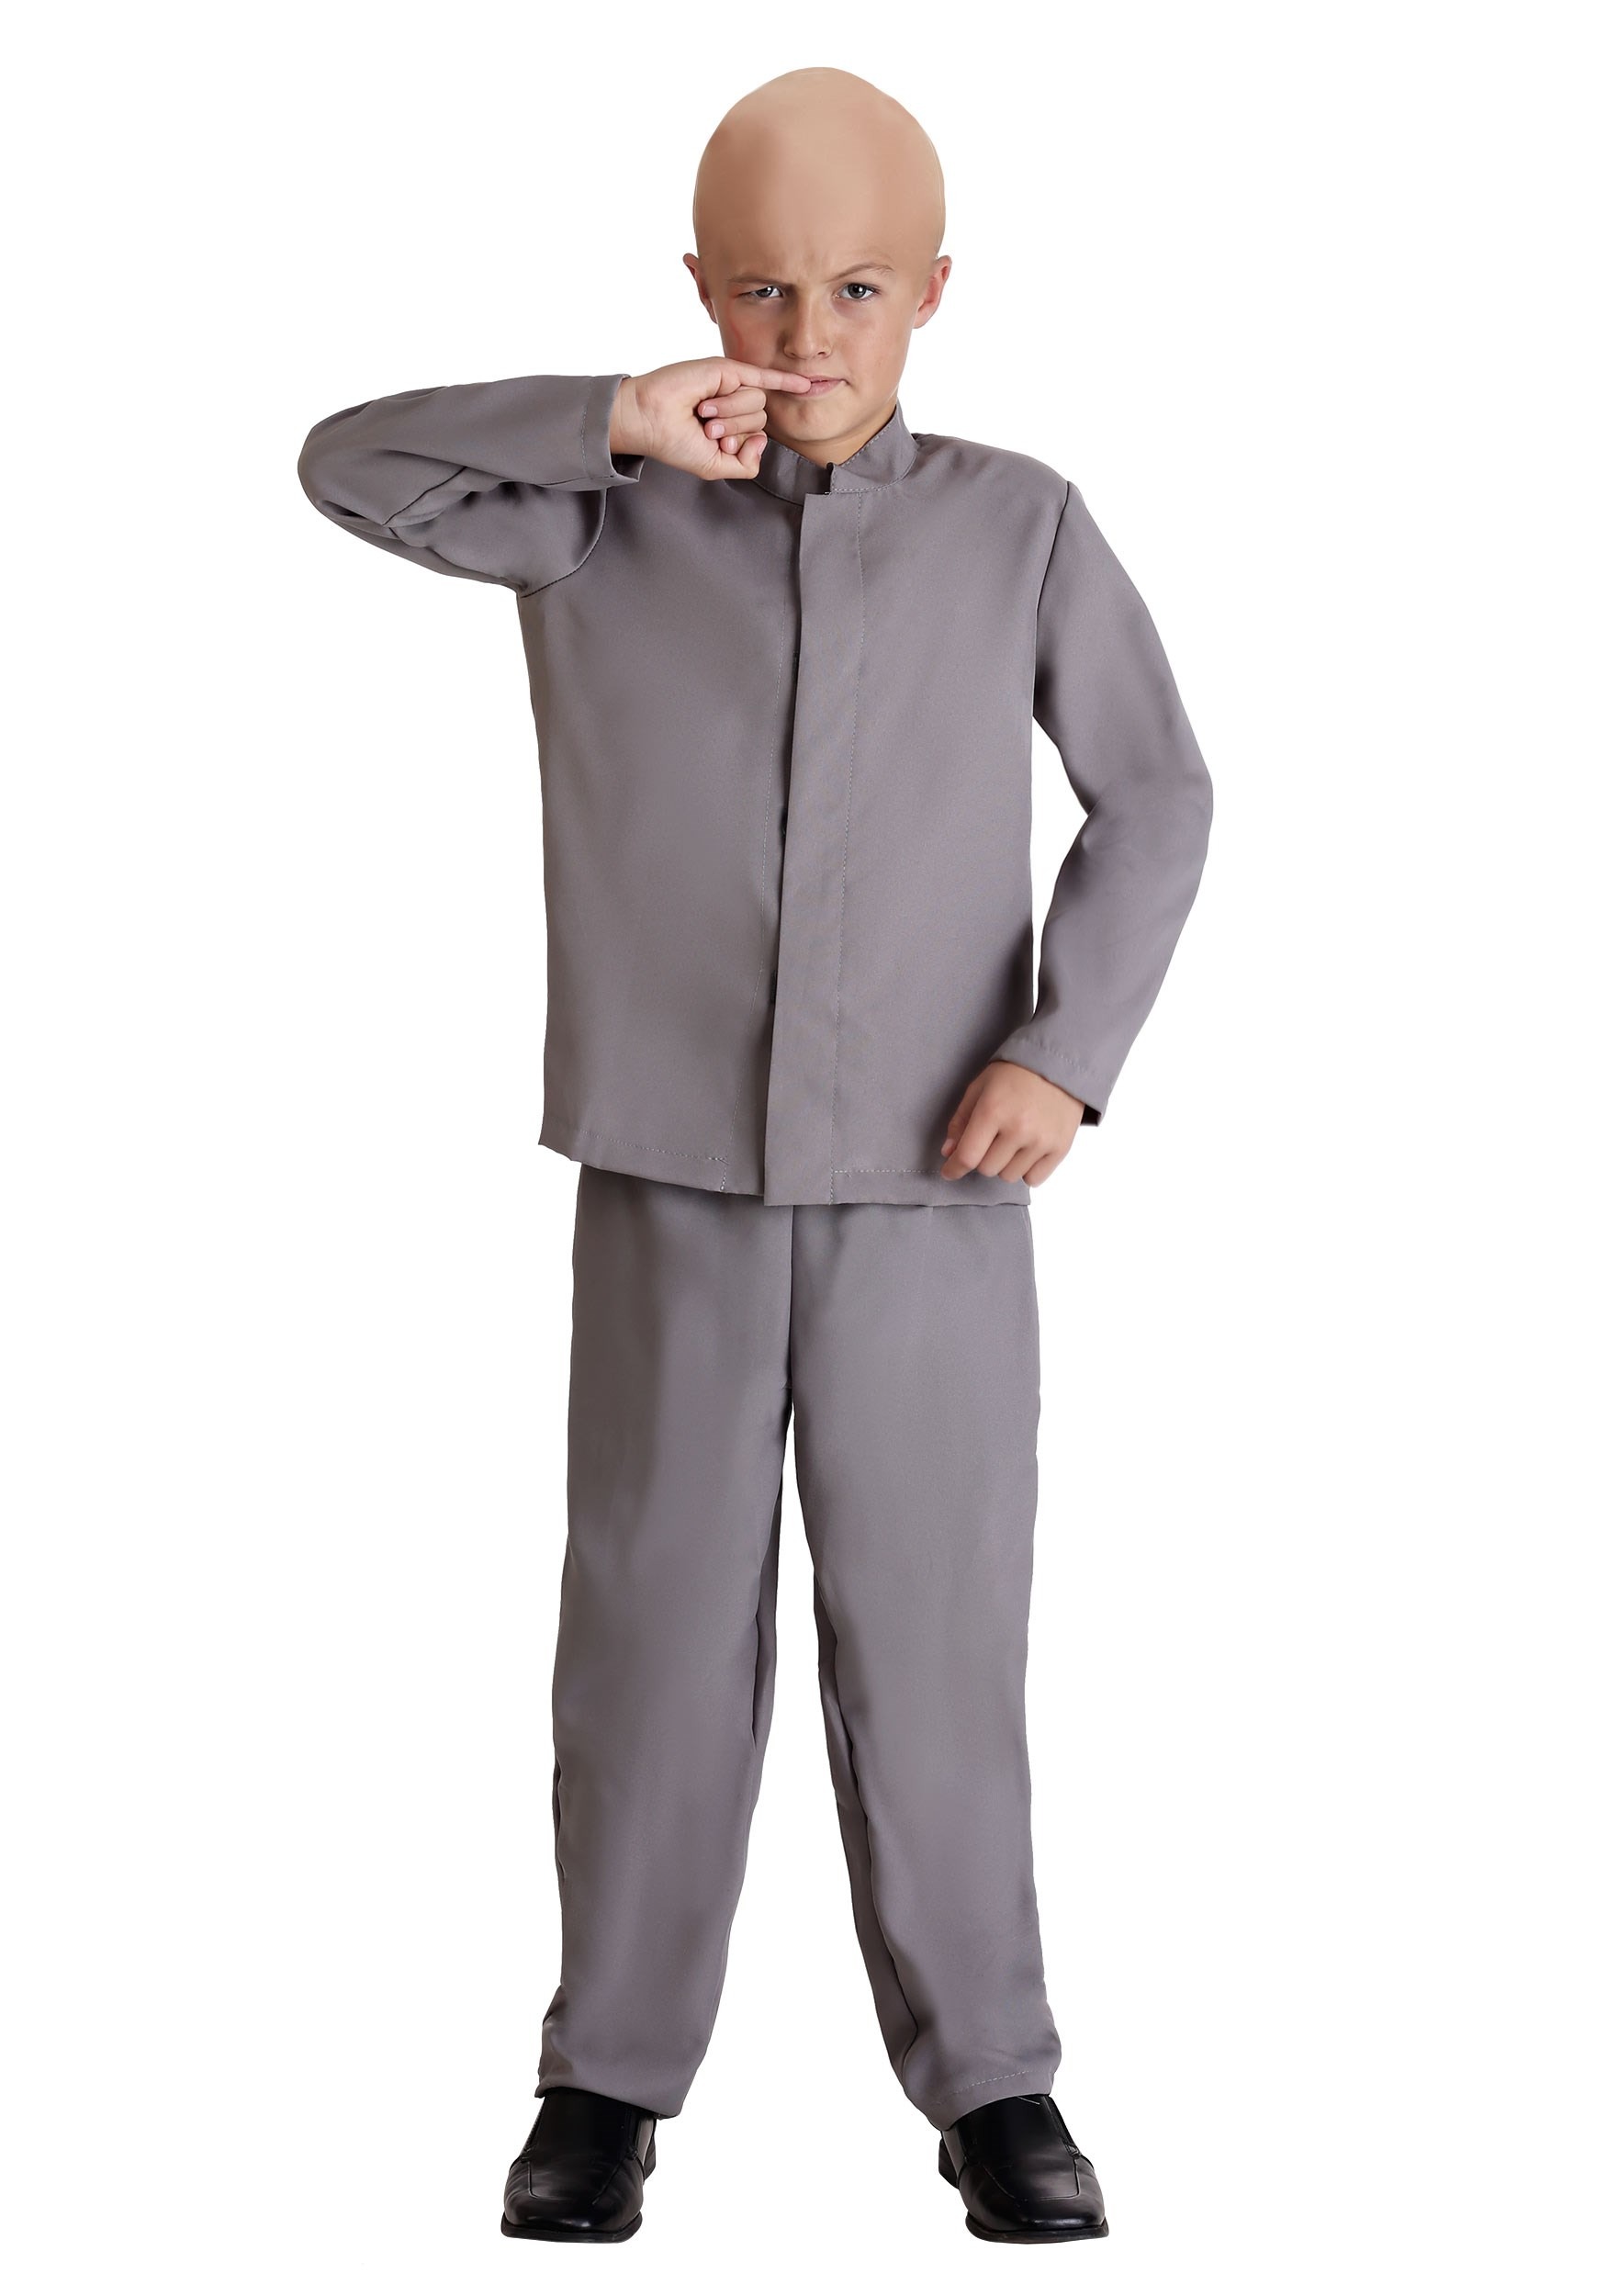 Photos - Fancy Dress FUN Costumes Deluxe Evil Grey Suit for Kids Gray FUN1415